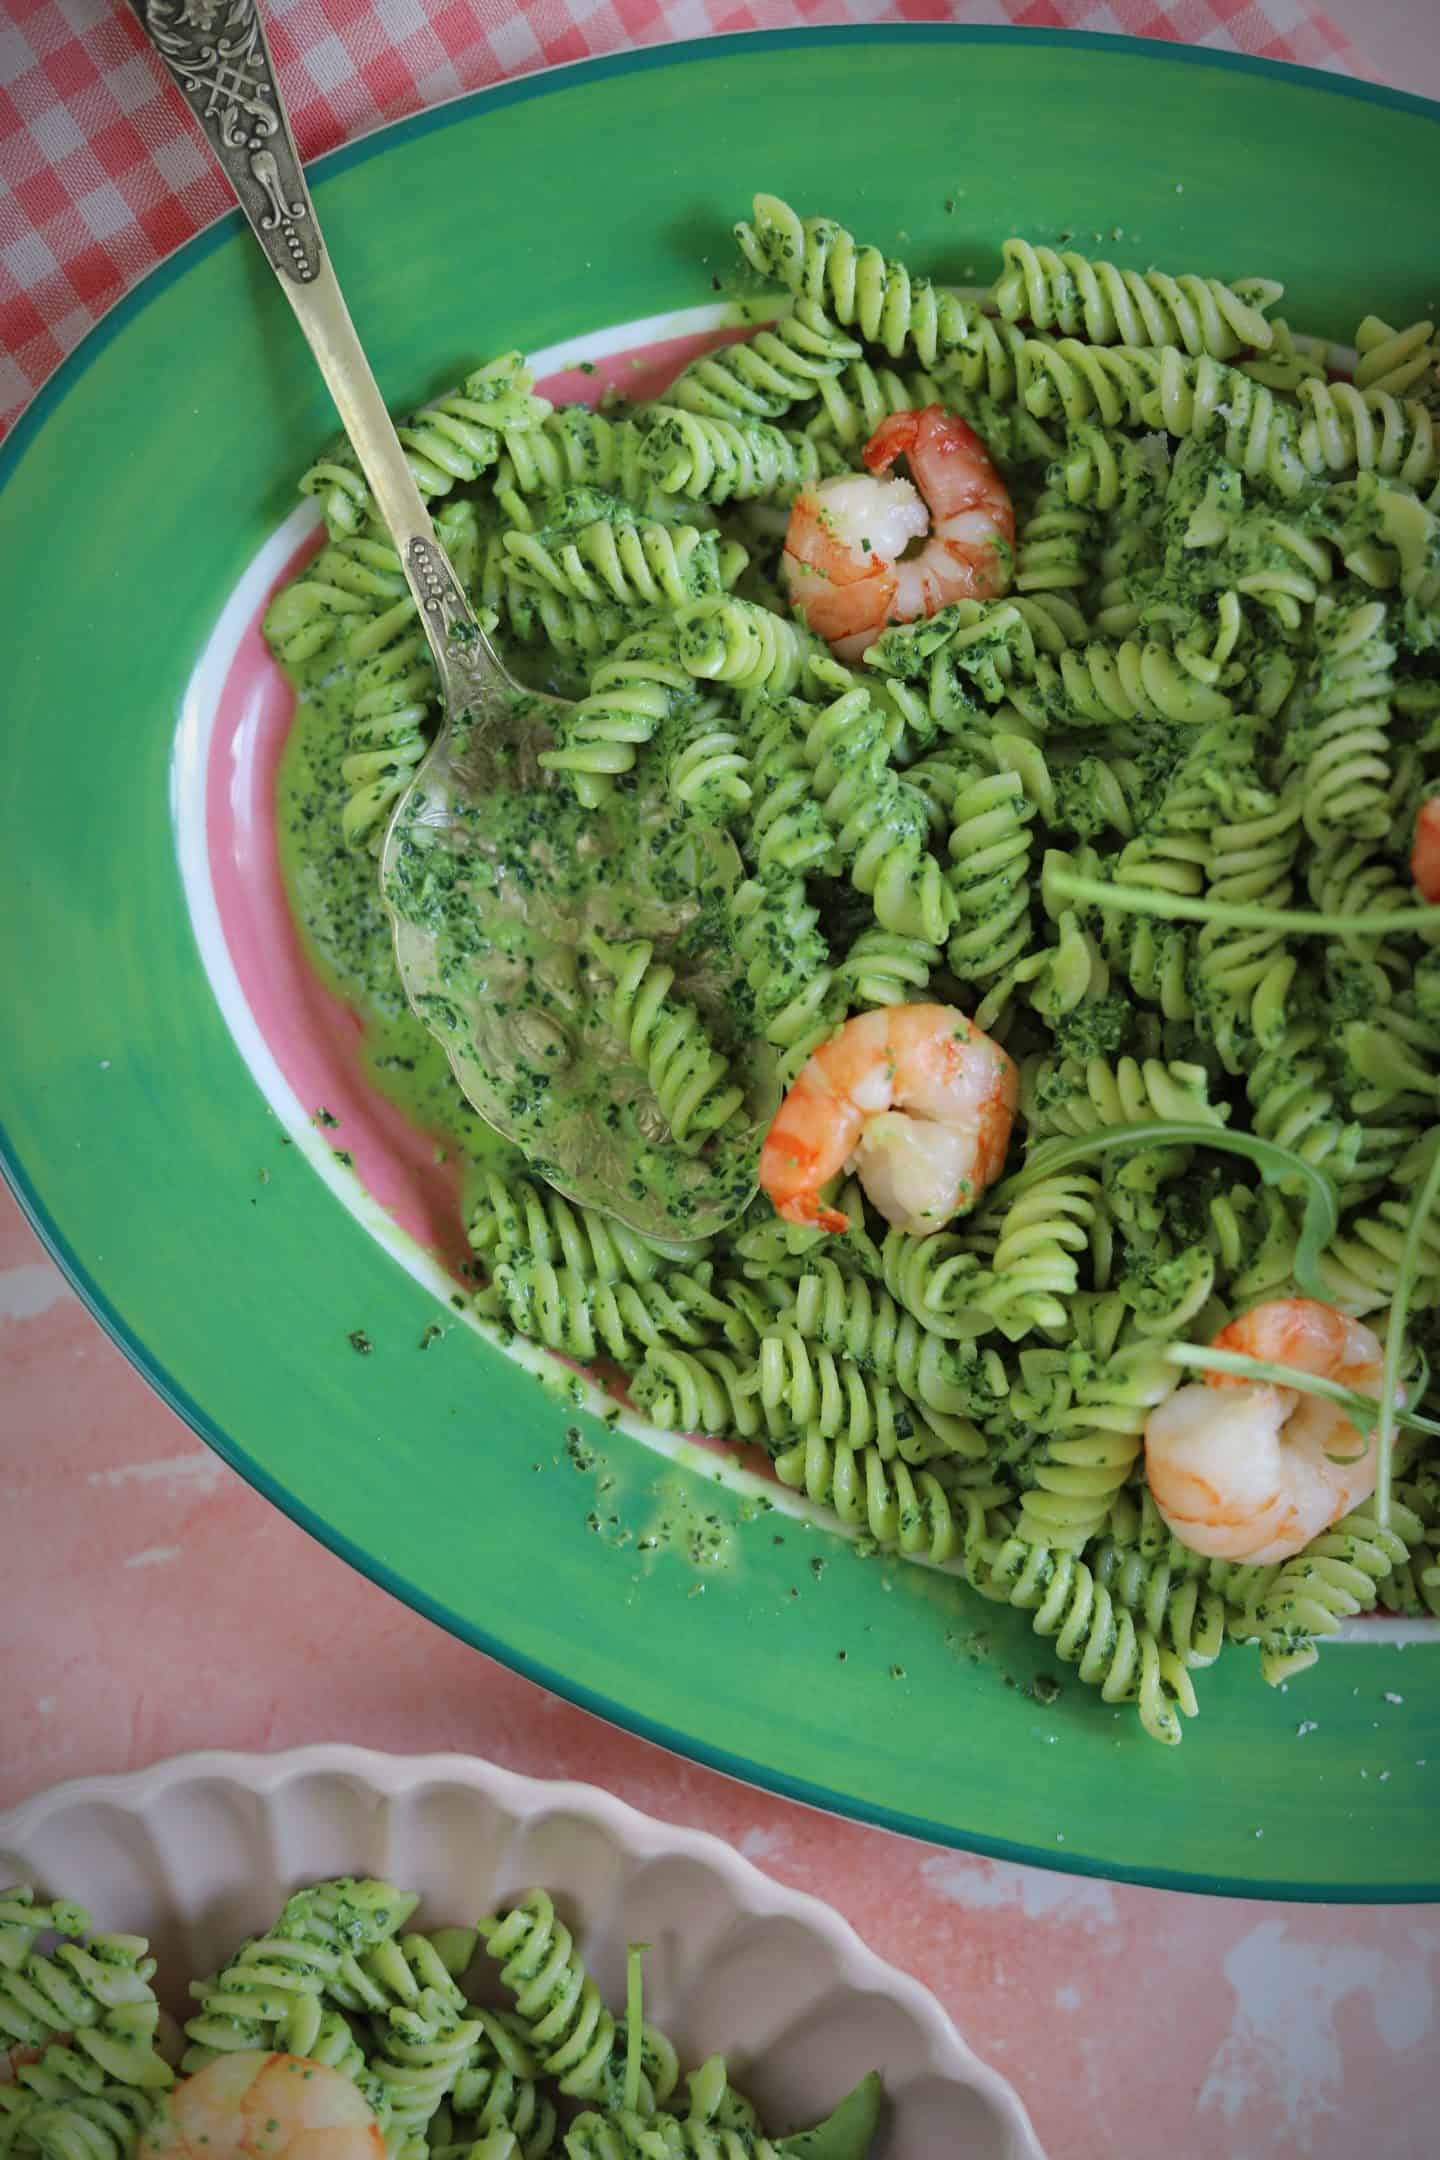 A plate of green pasta sauce with tiger prawns.